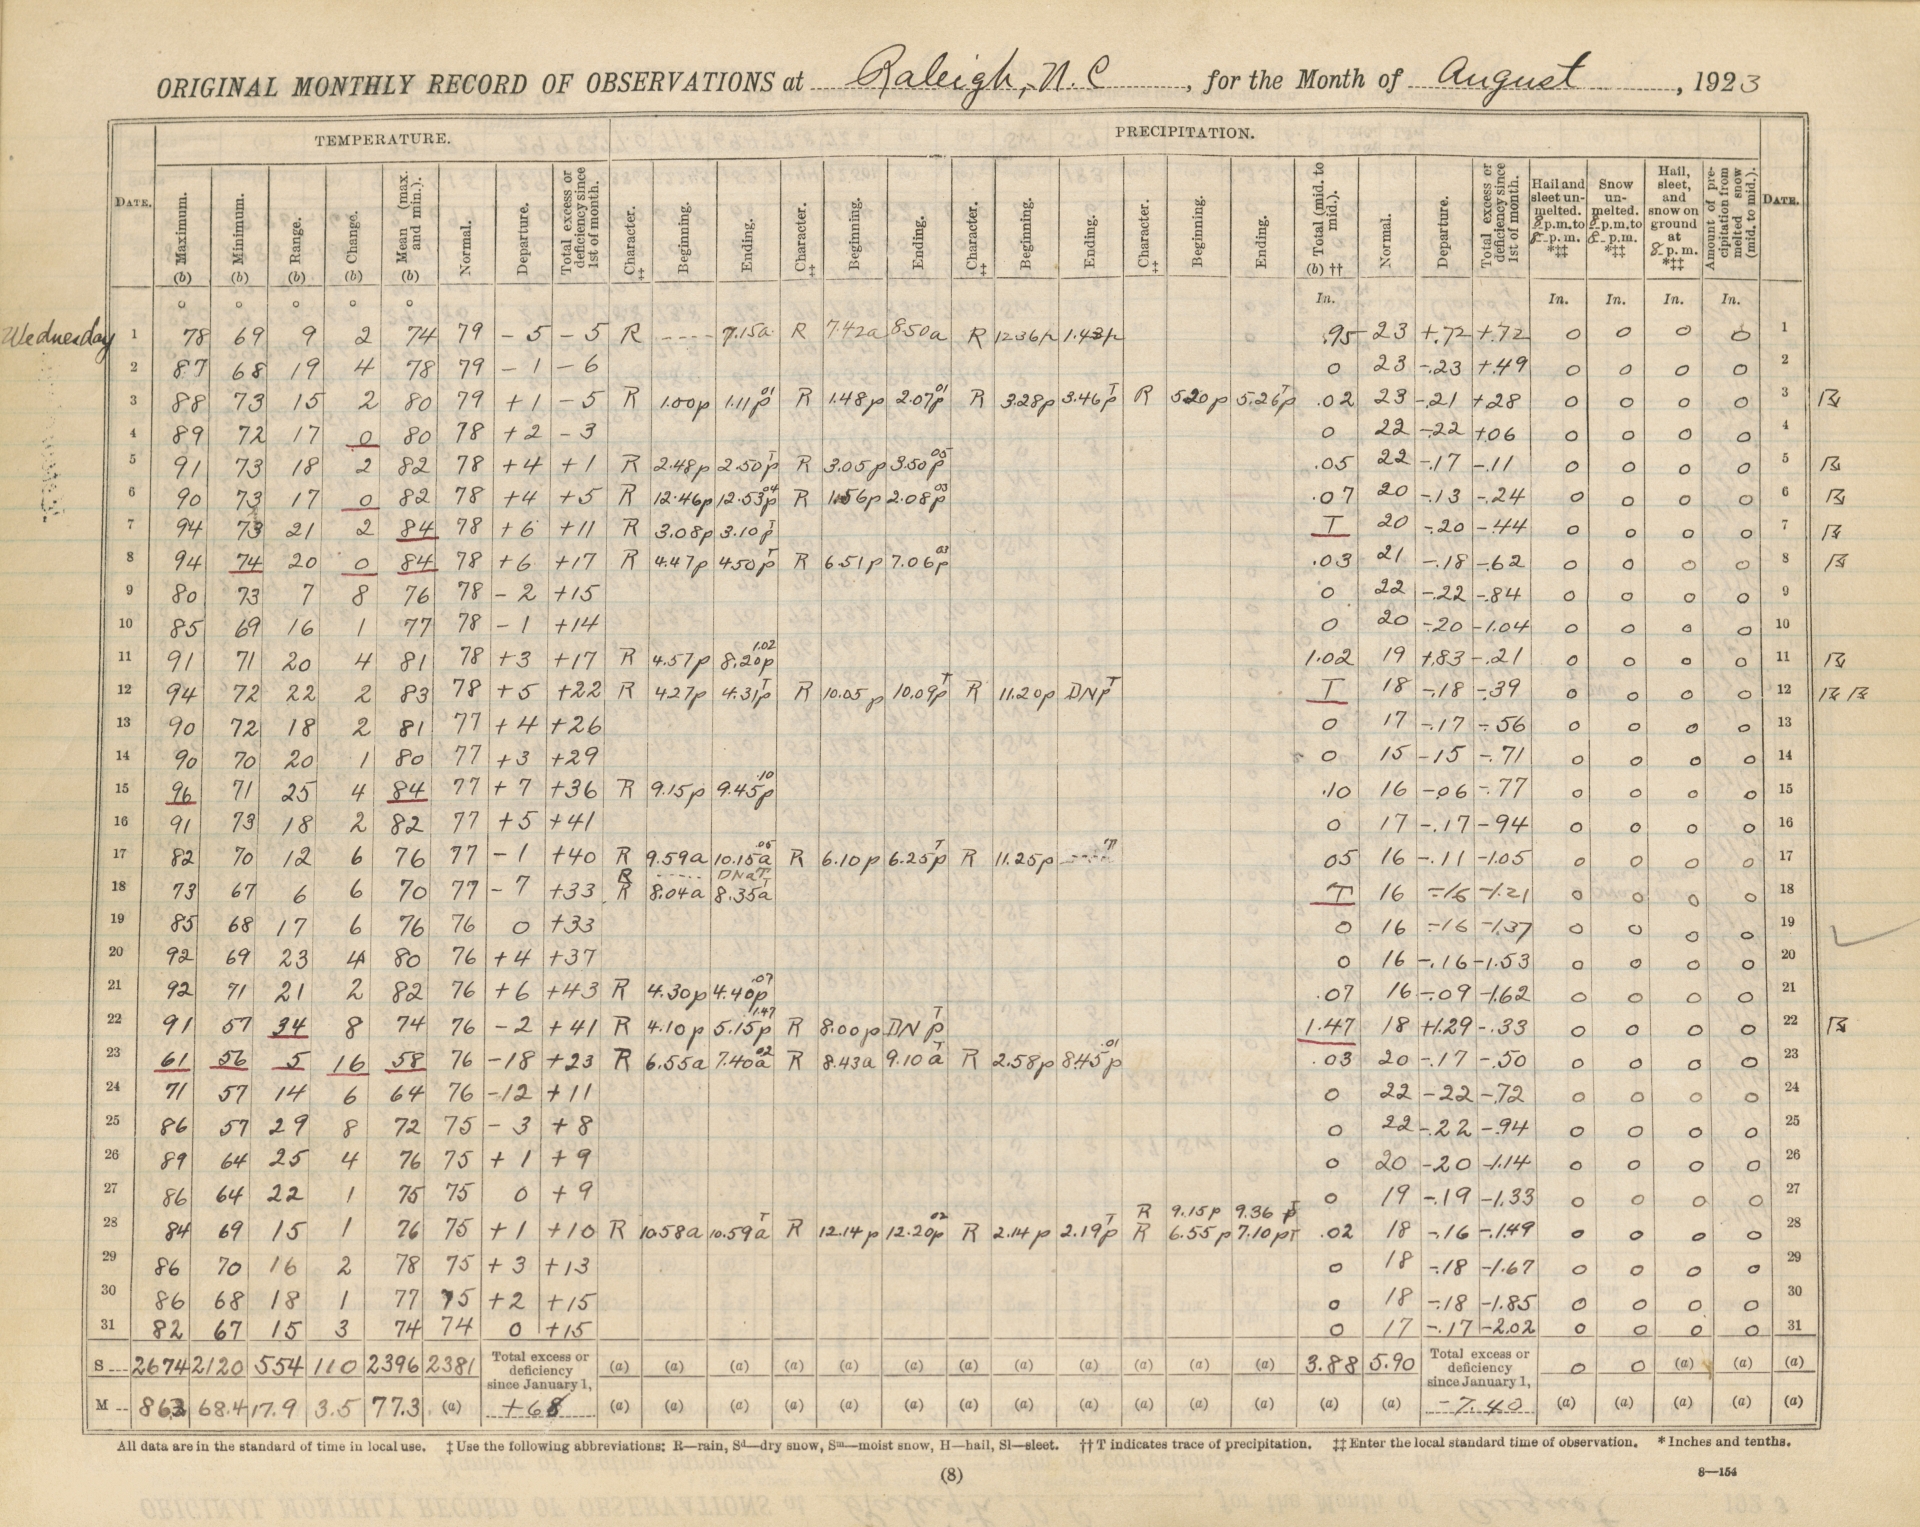 Raleigh weather summary for August 1923